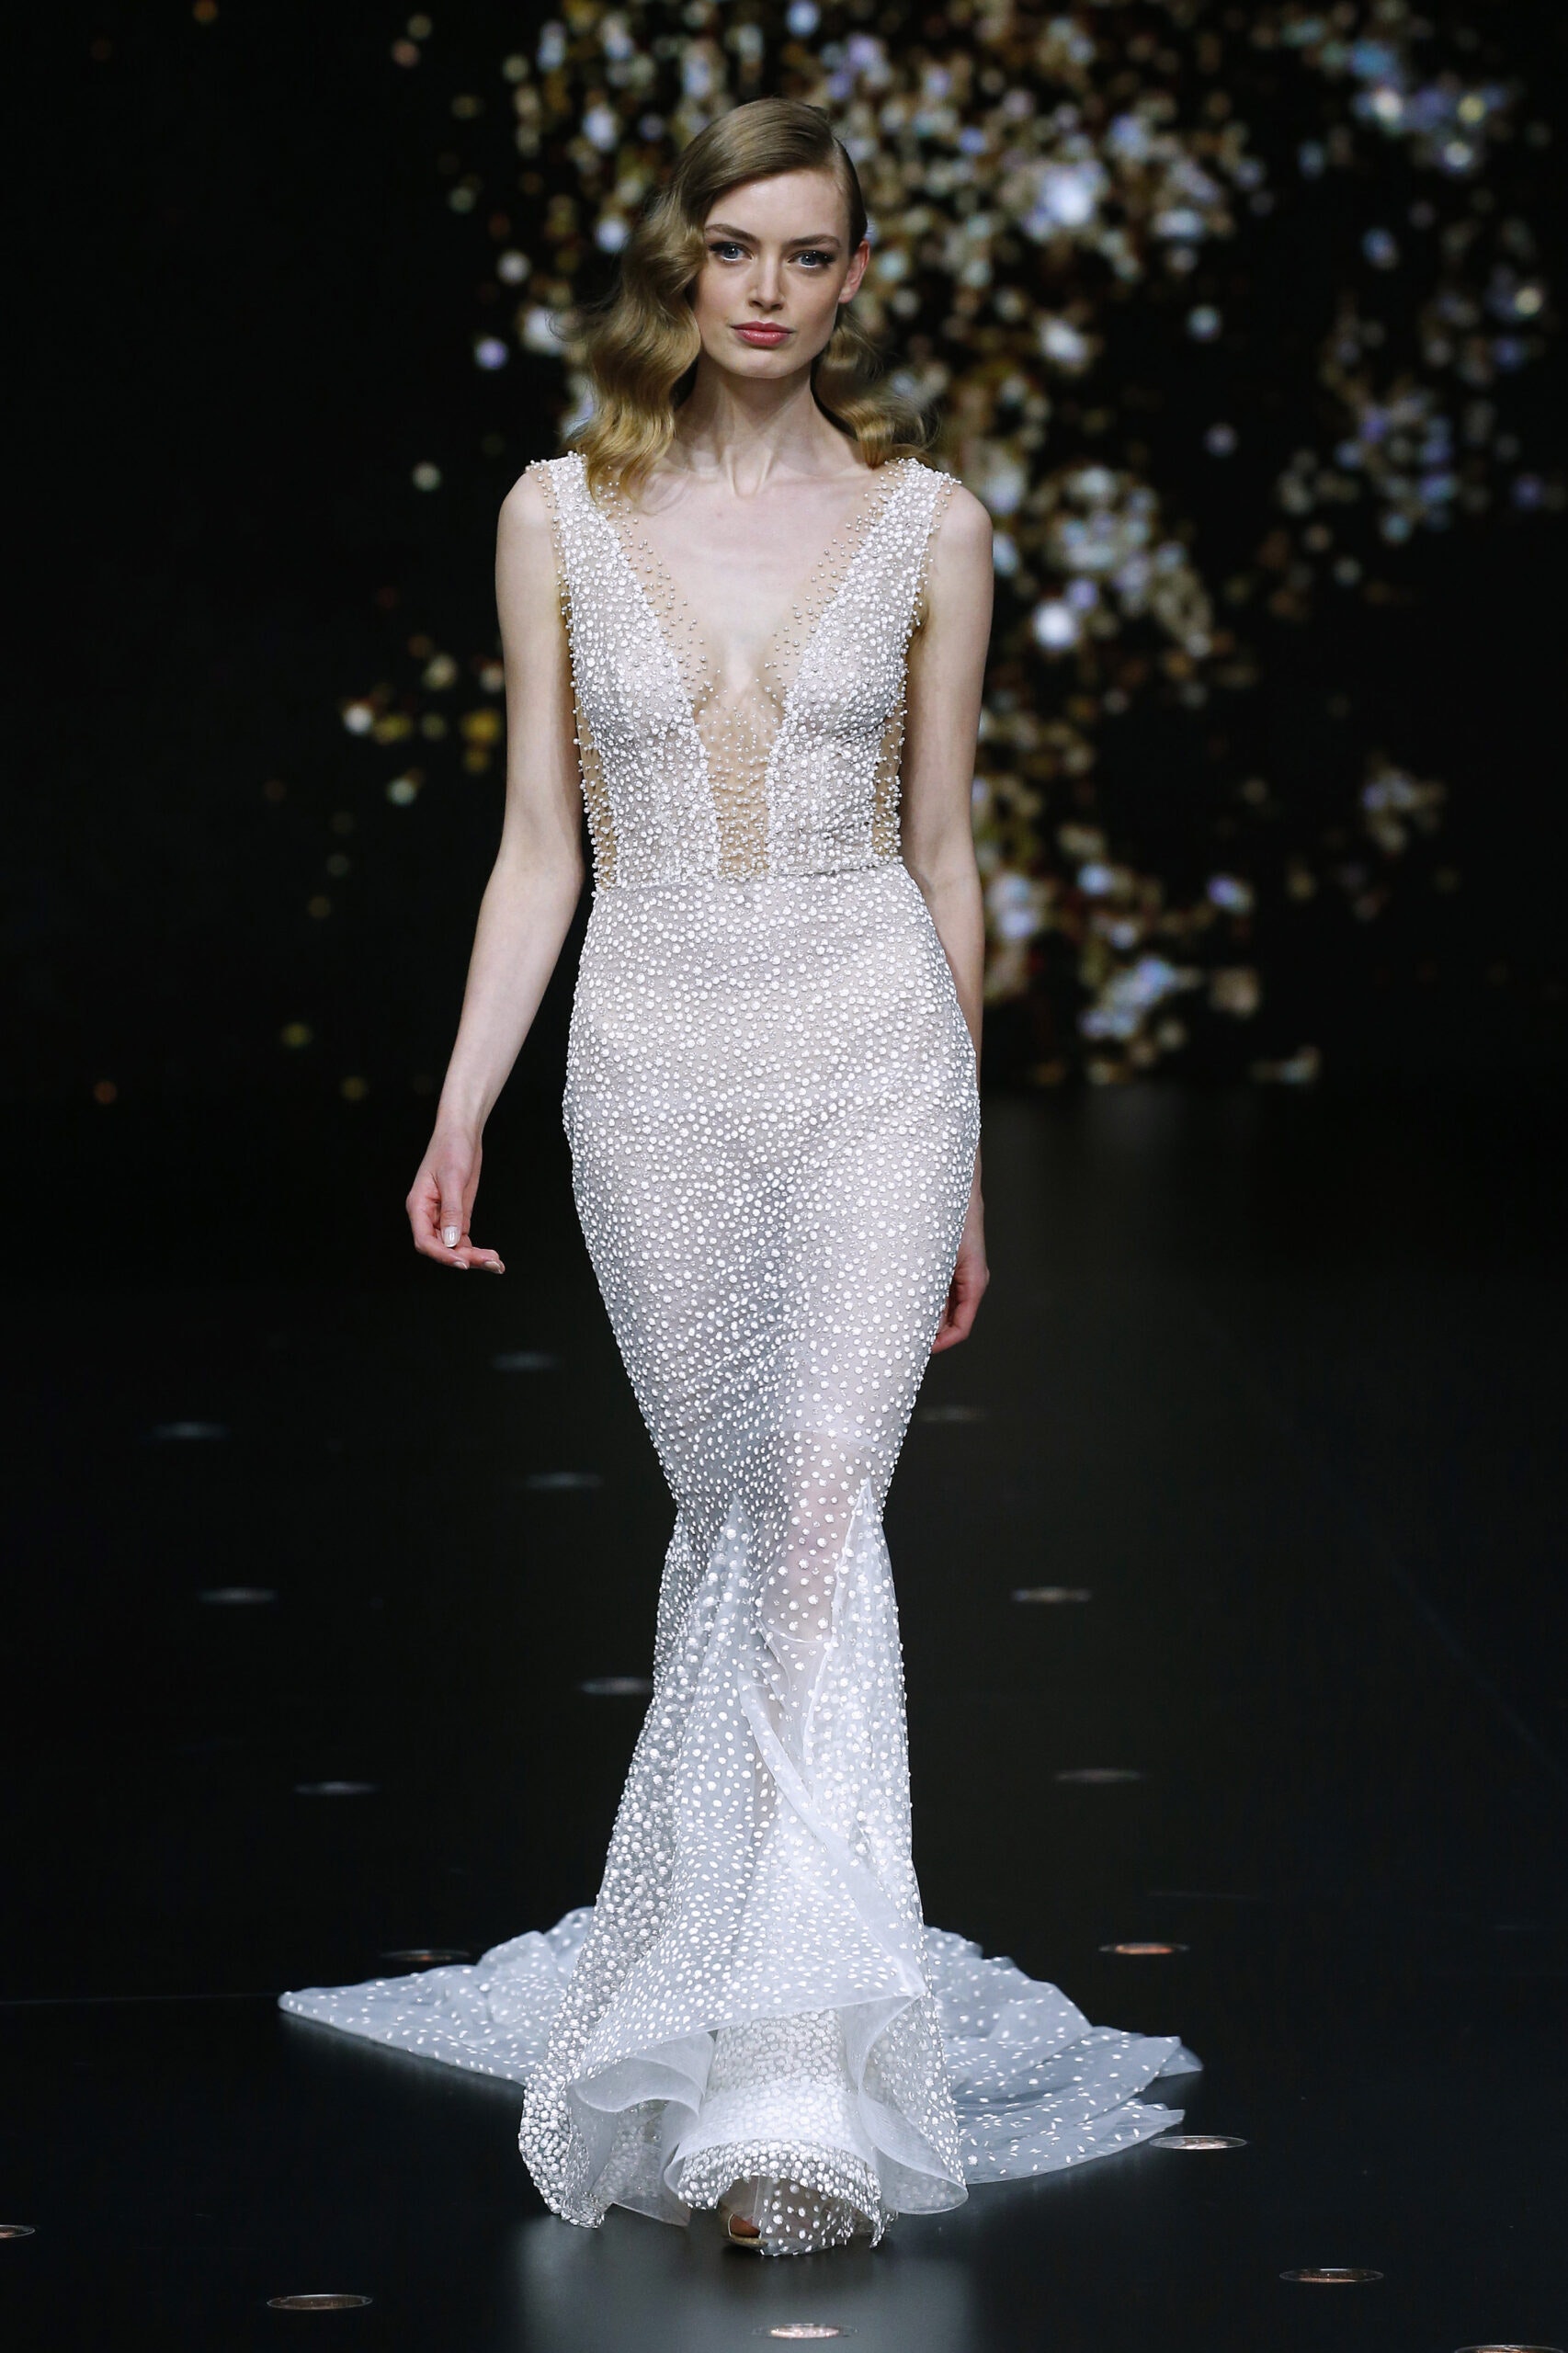 searching for a mermaid wedding dress? we have the best inspiration and styles to shop